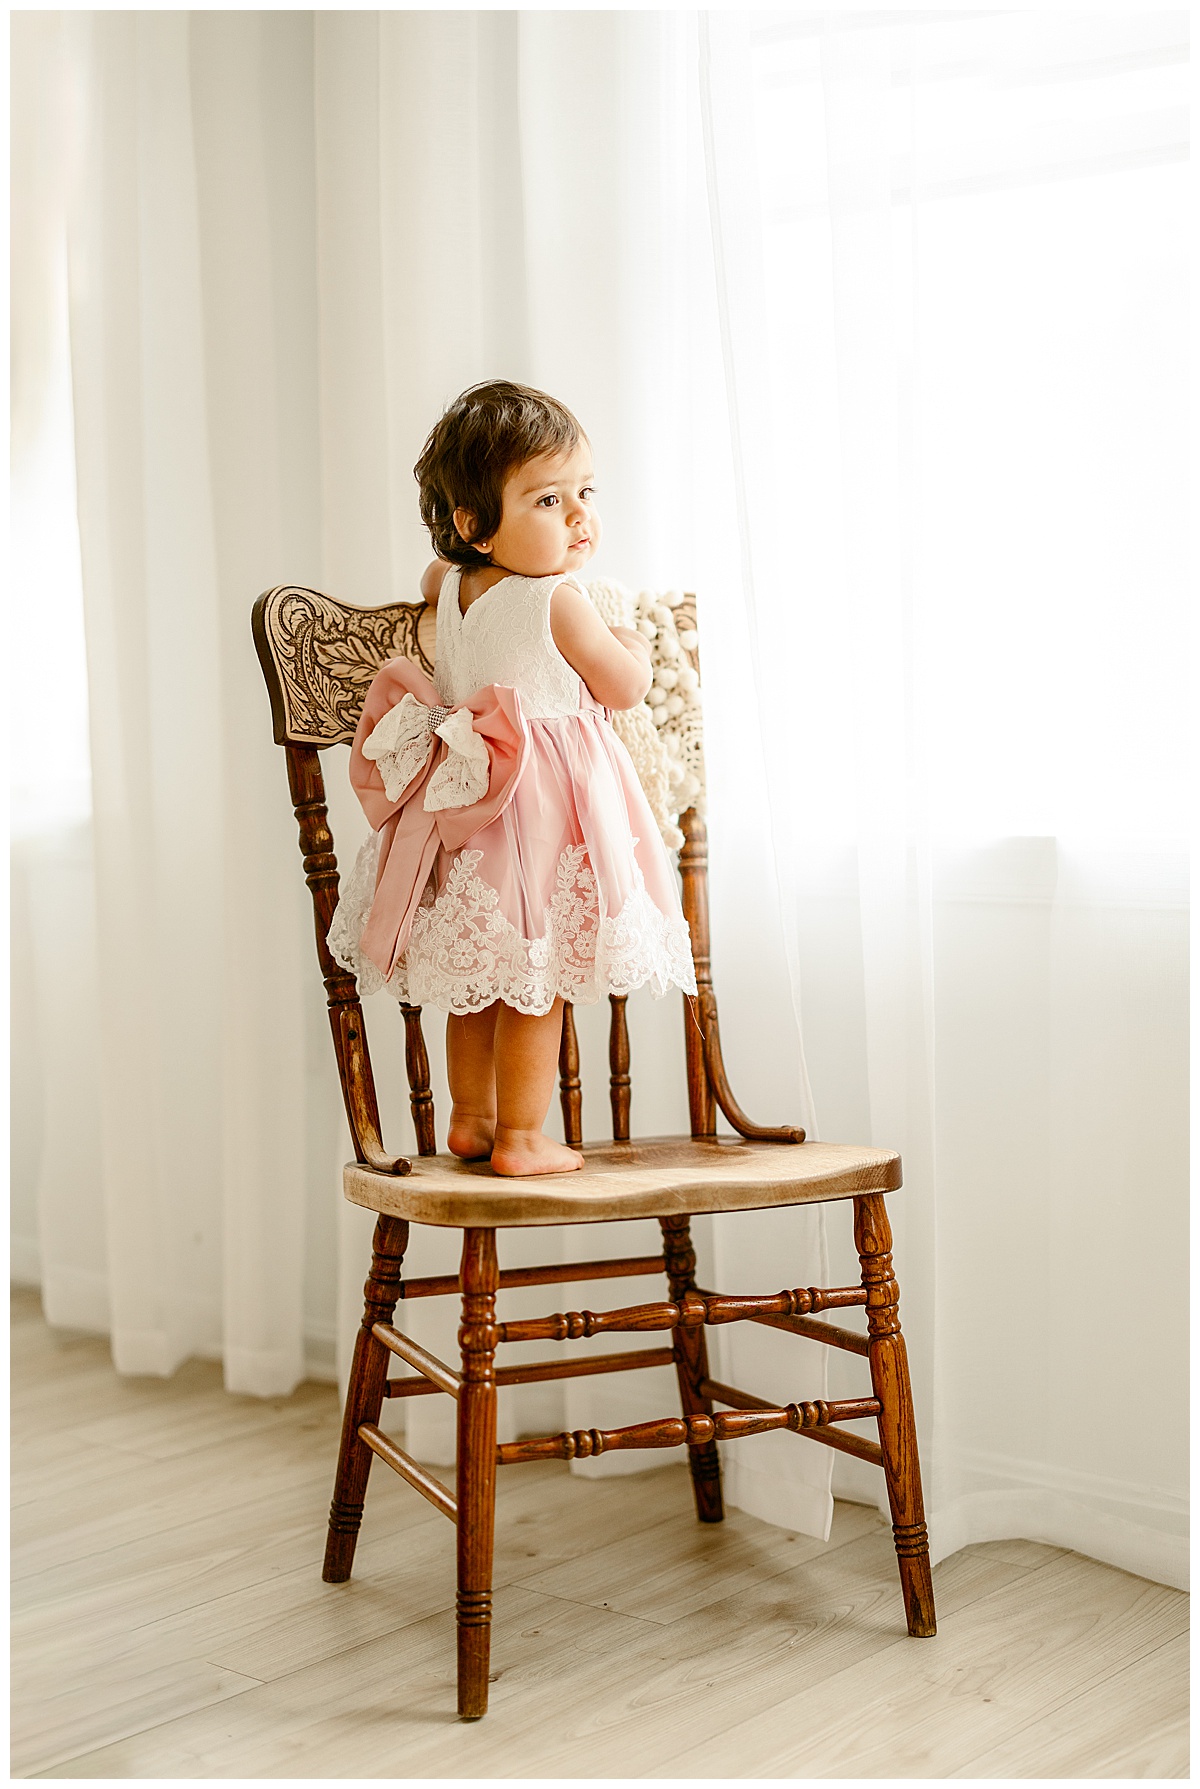 Baby girl stands on a chair during their Unposed Lifestyle Shoot